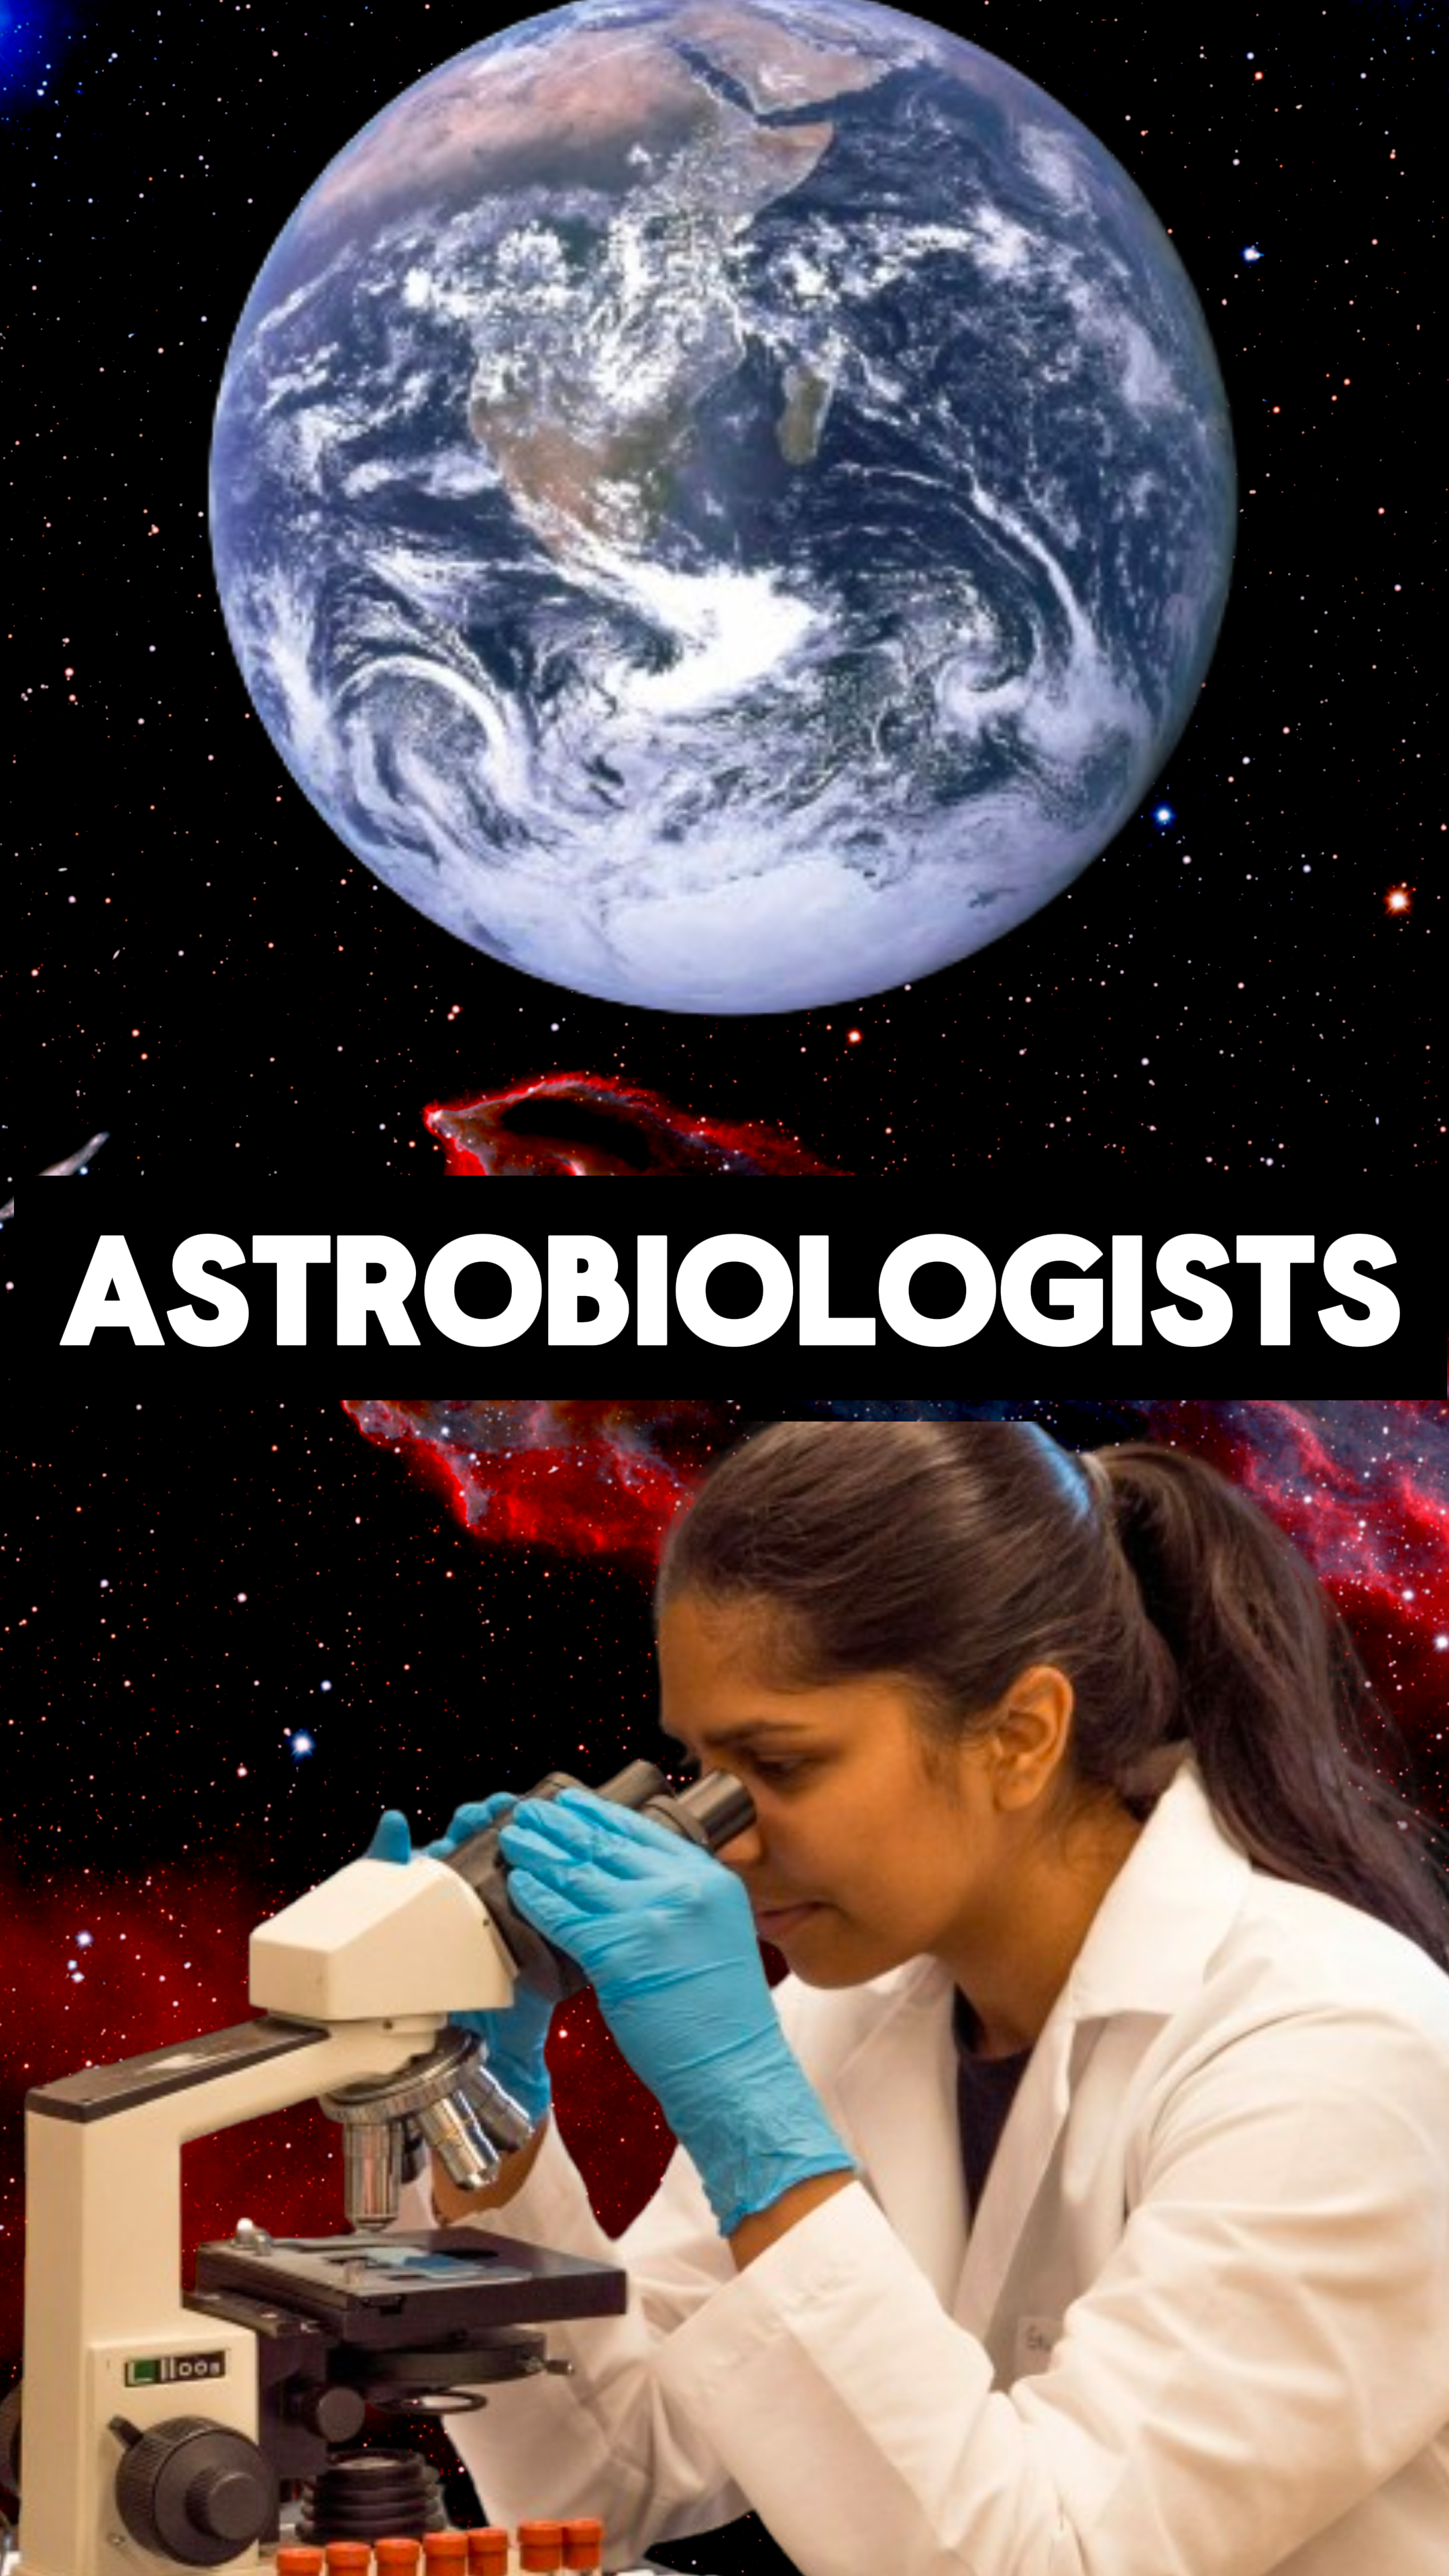 What Do Astrobiologists Do- The Connection Between Biology and Astrono